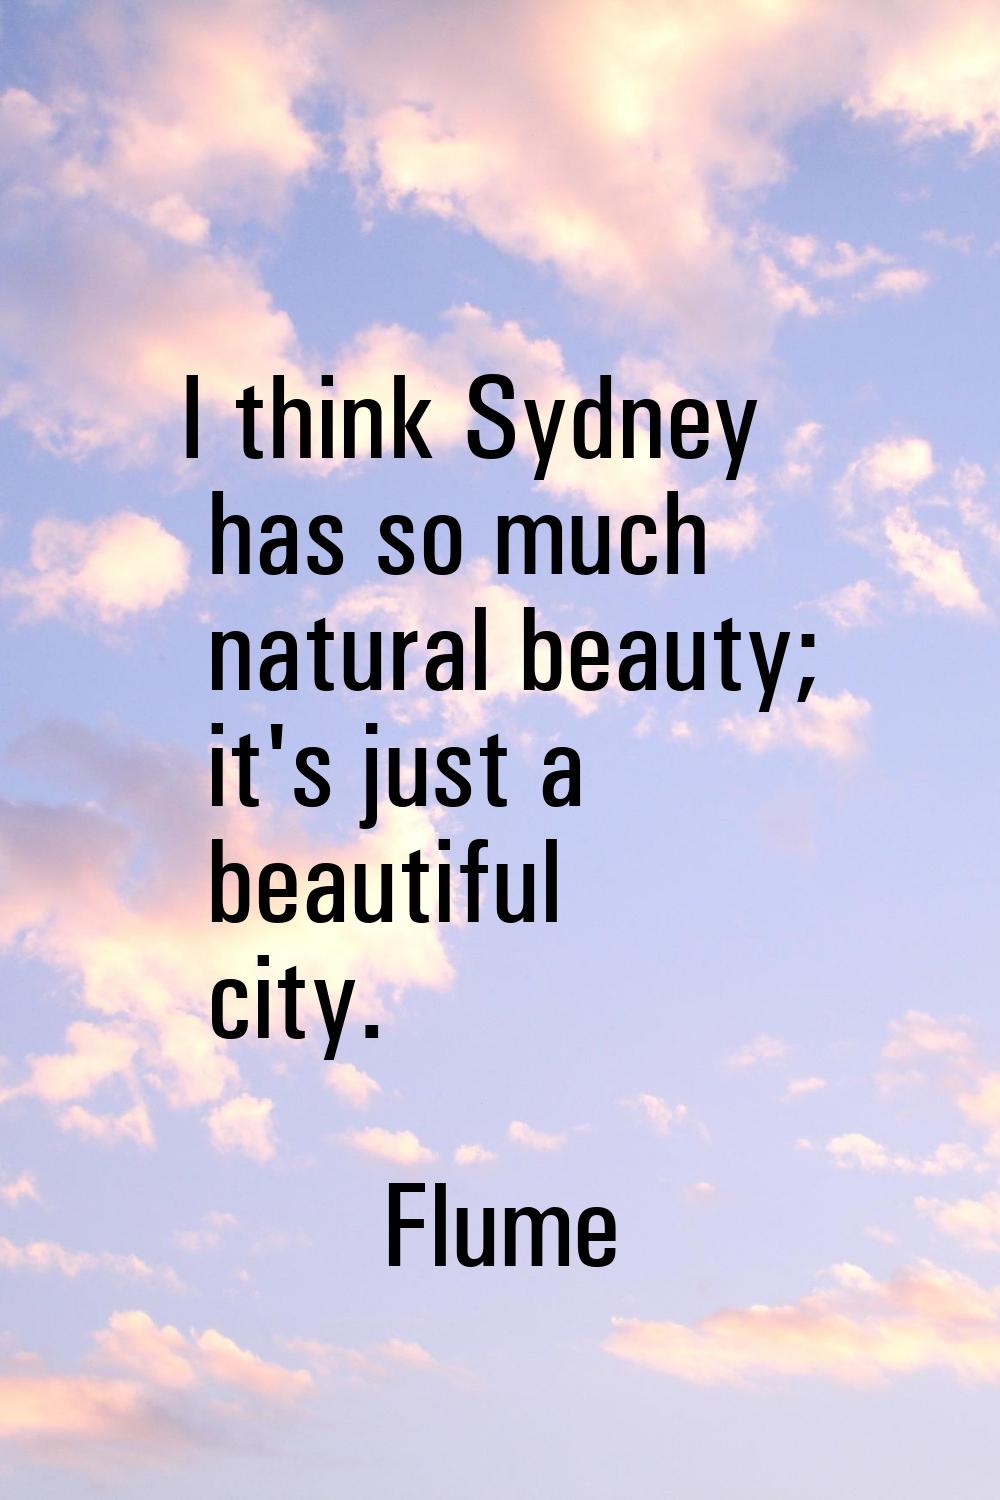 I think Sydney has so much natural beauty; it's just a beautiful city.